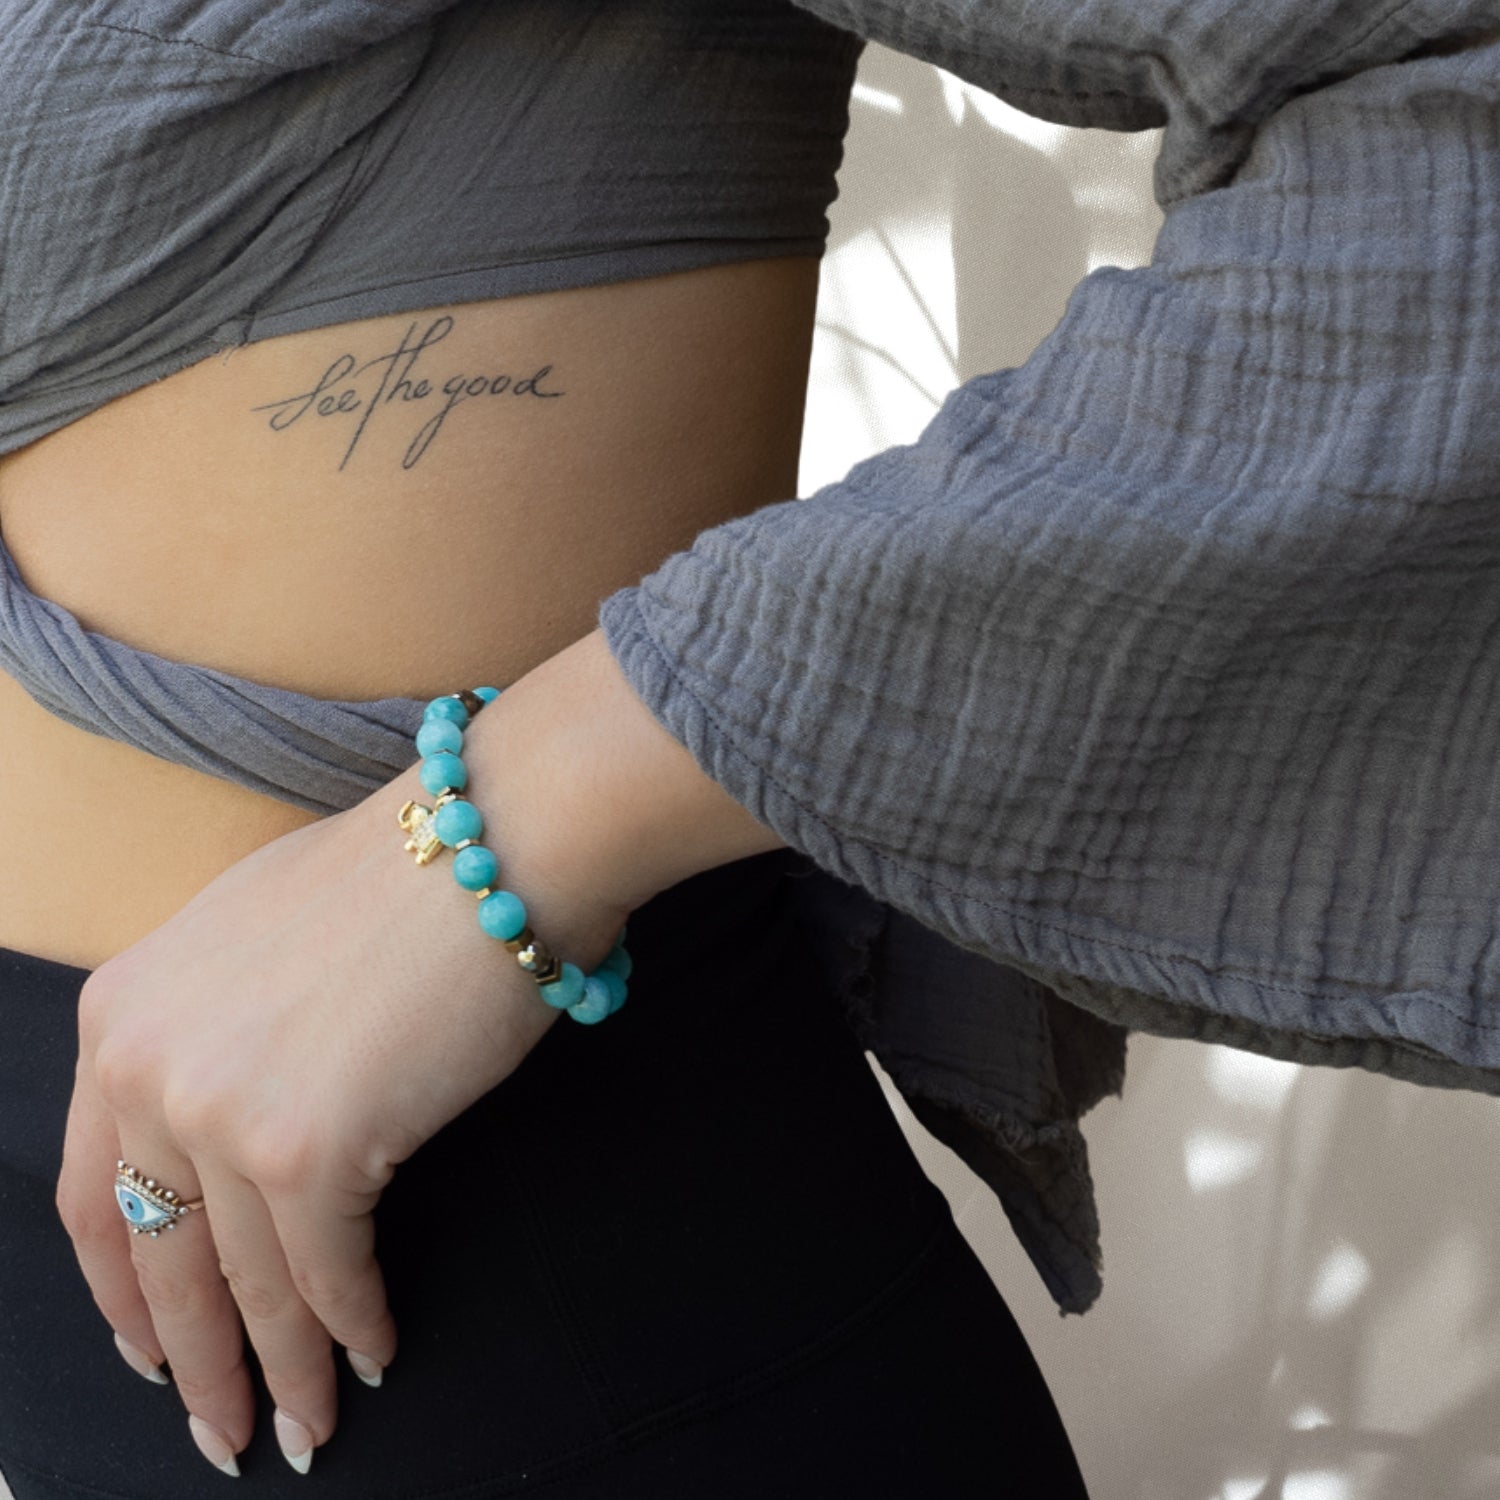 Experience the beauty and energy of our Amazonite Lucky Elephant Bracelet, as modeled by our gorgeous model